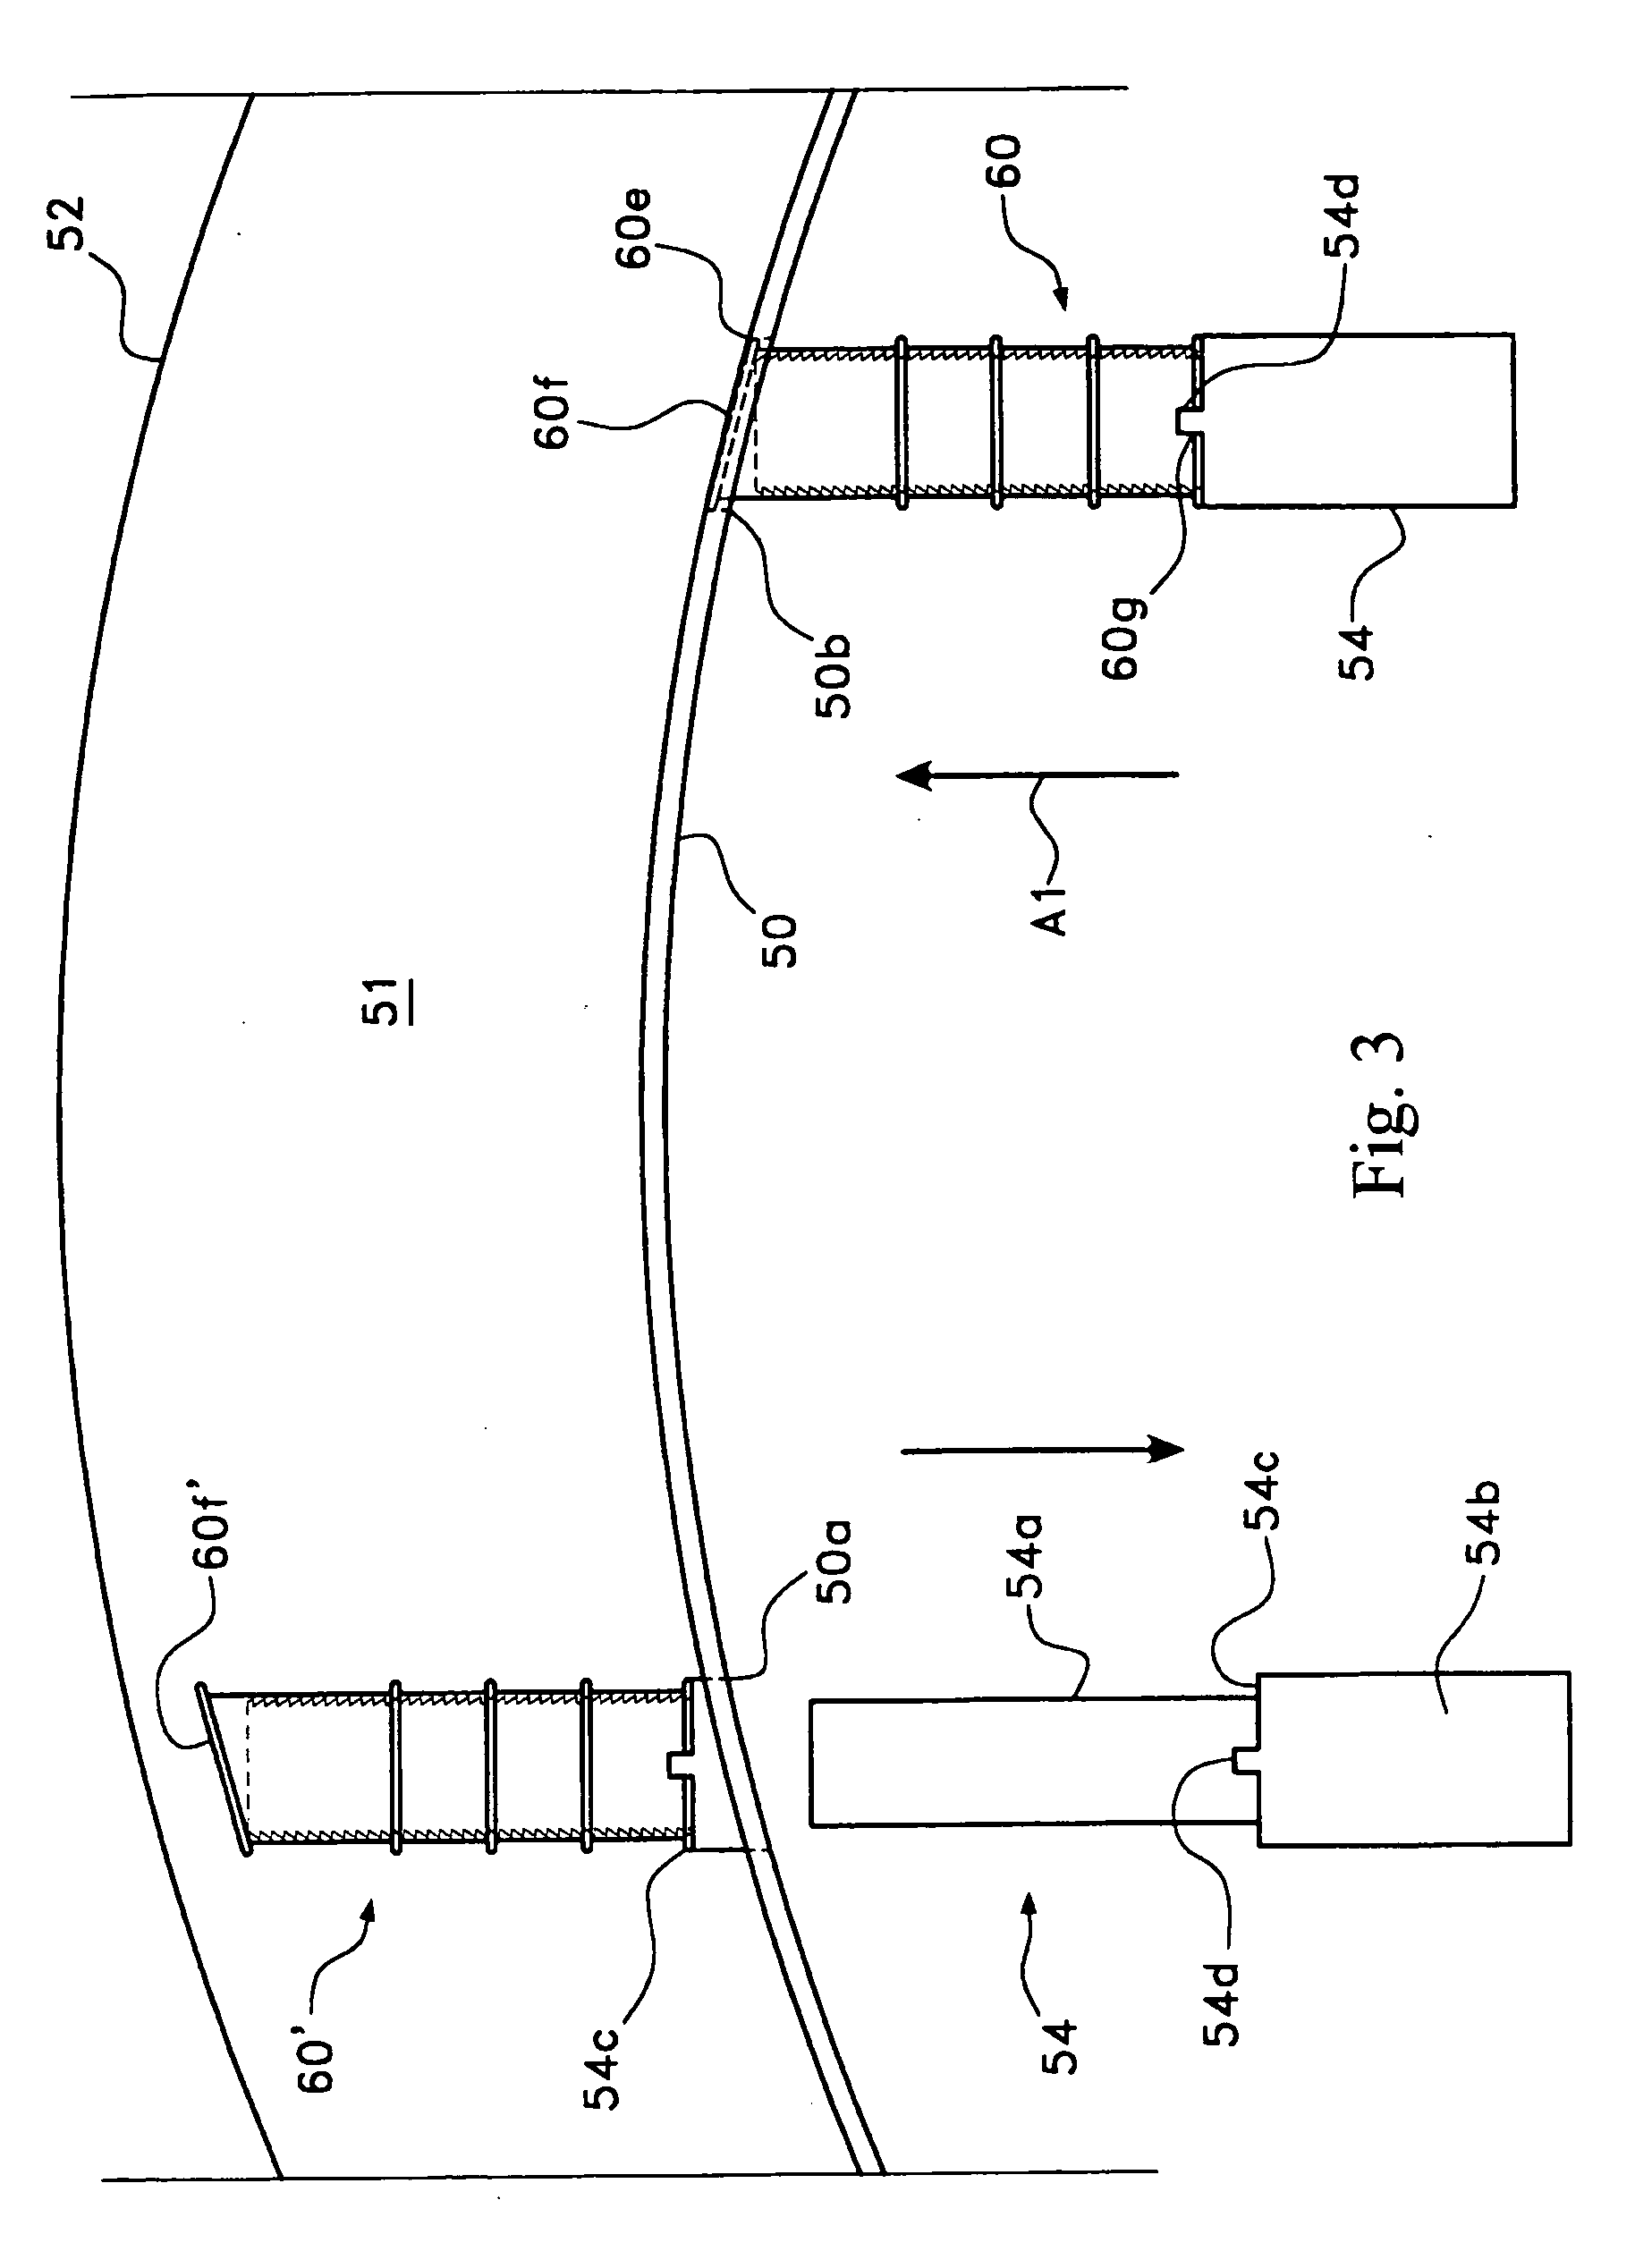 Inserts and method and apparatus for embedding inserts in cast members